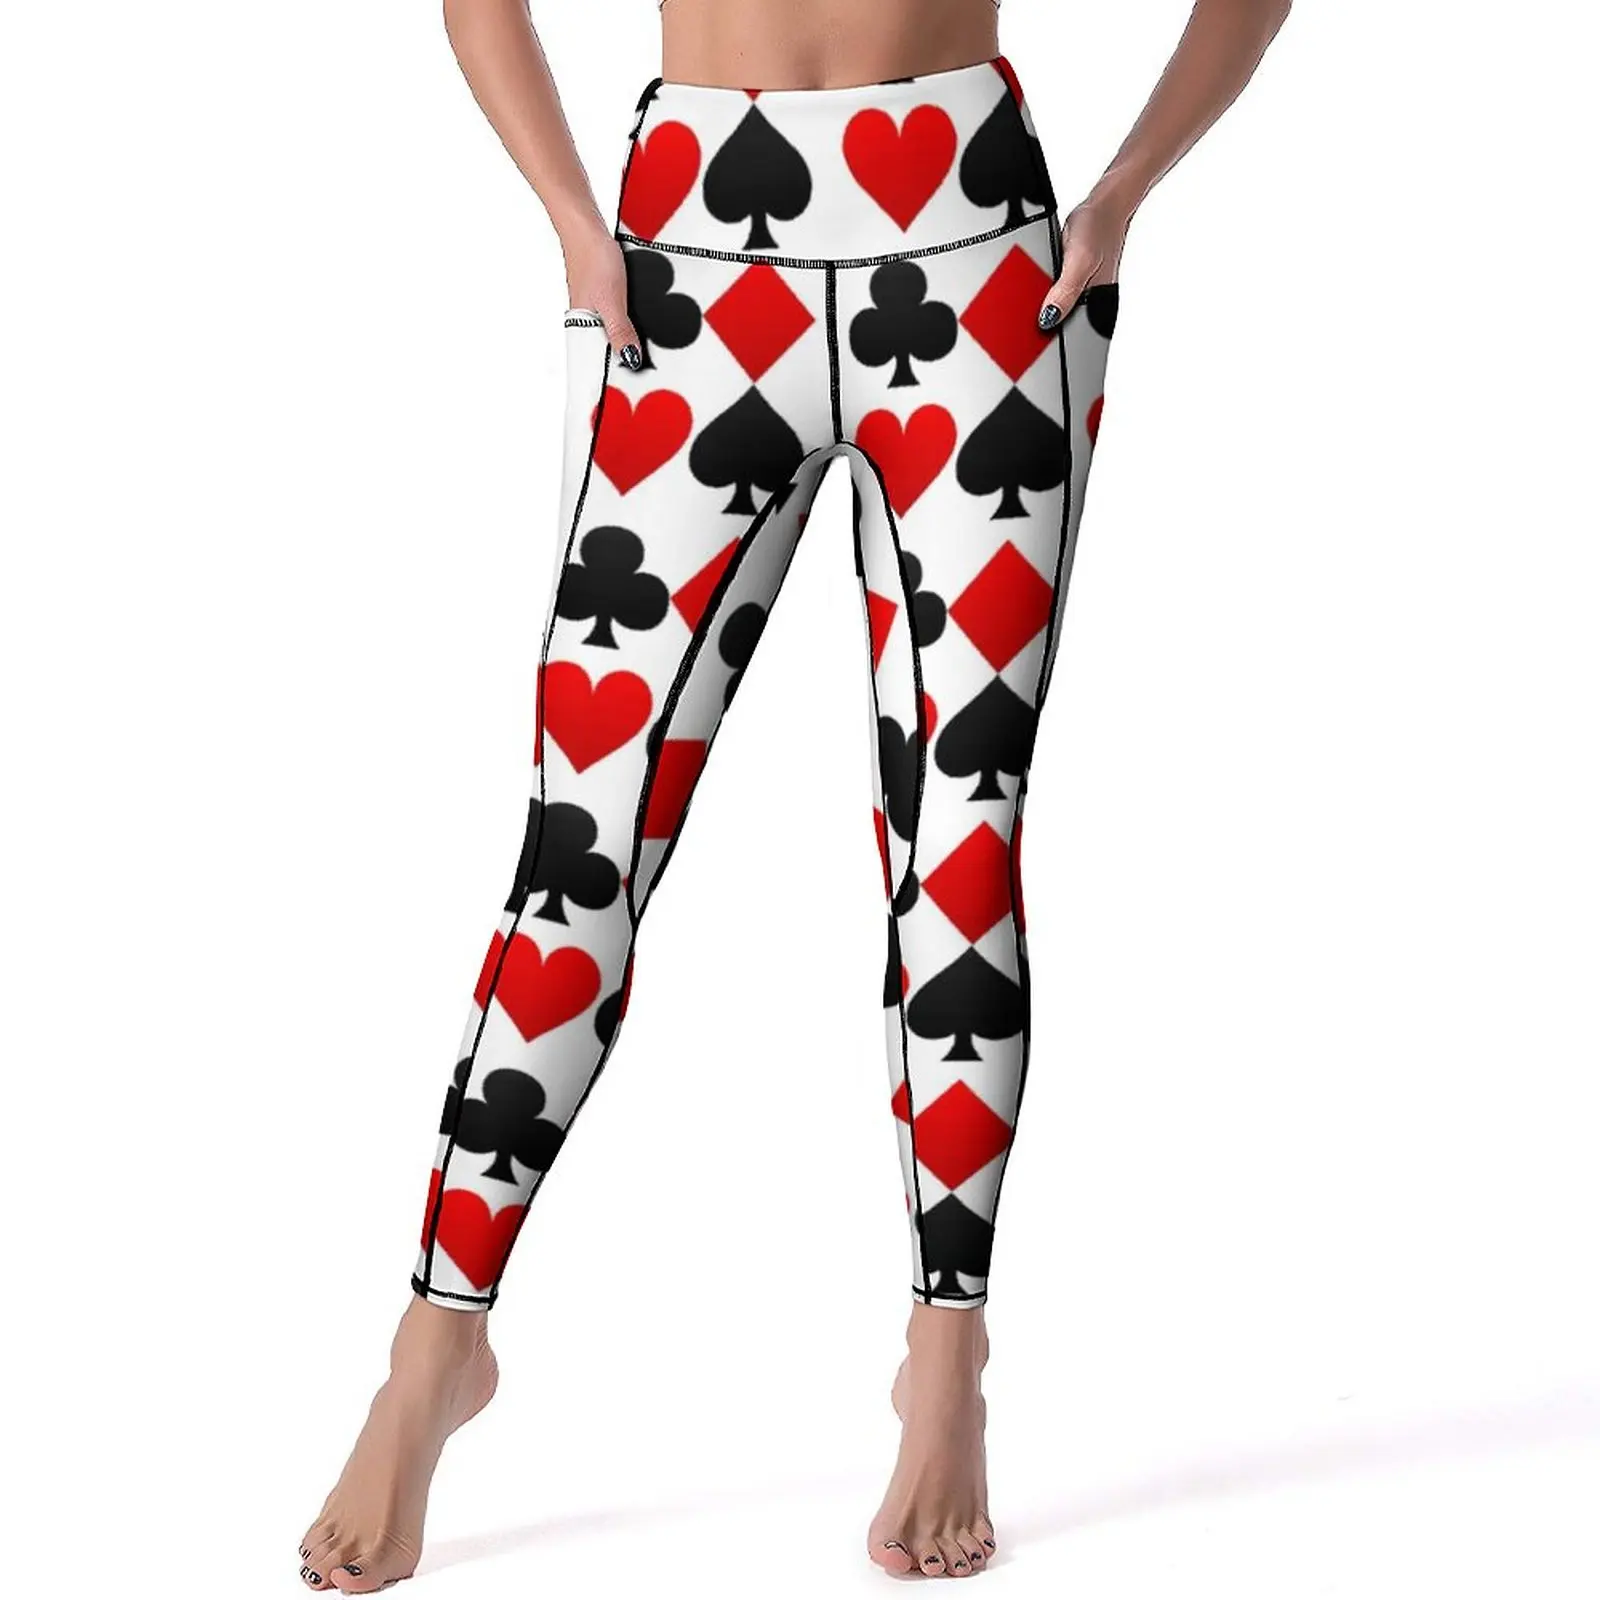 

Playing Poker Card Leggings Sexy Hearts Diamonds Clubs Spades Push Up Yoga Pants Vintage Stretch Fitness Running Sport Legging